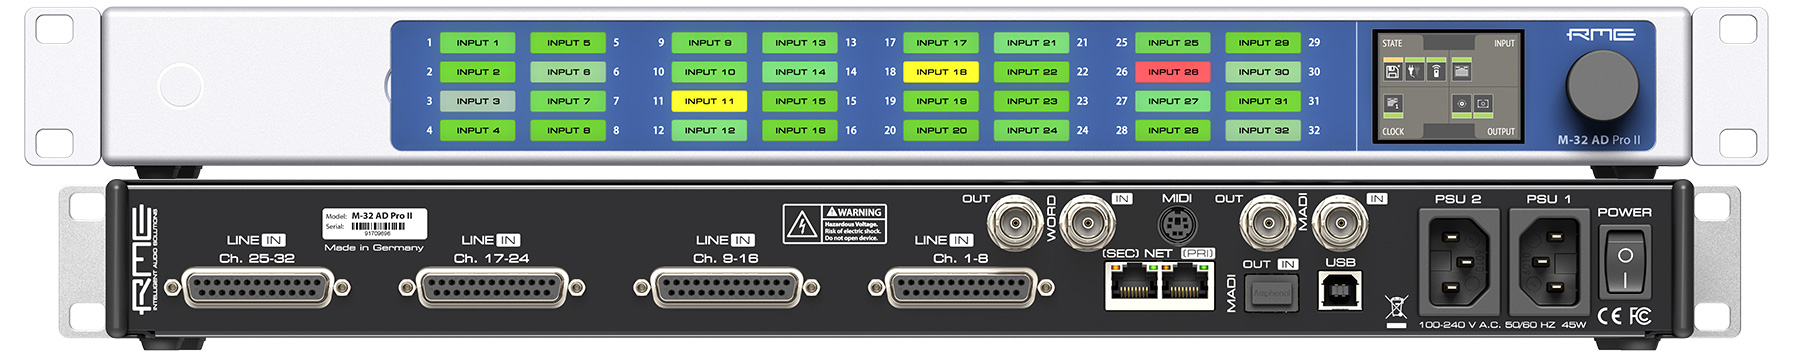 RME M-32 Pro AD II front and back panels